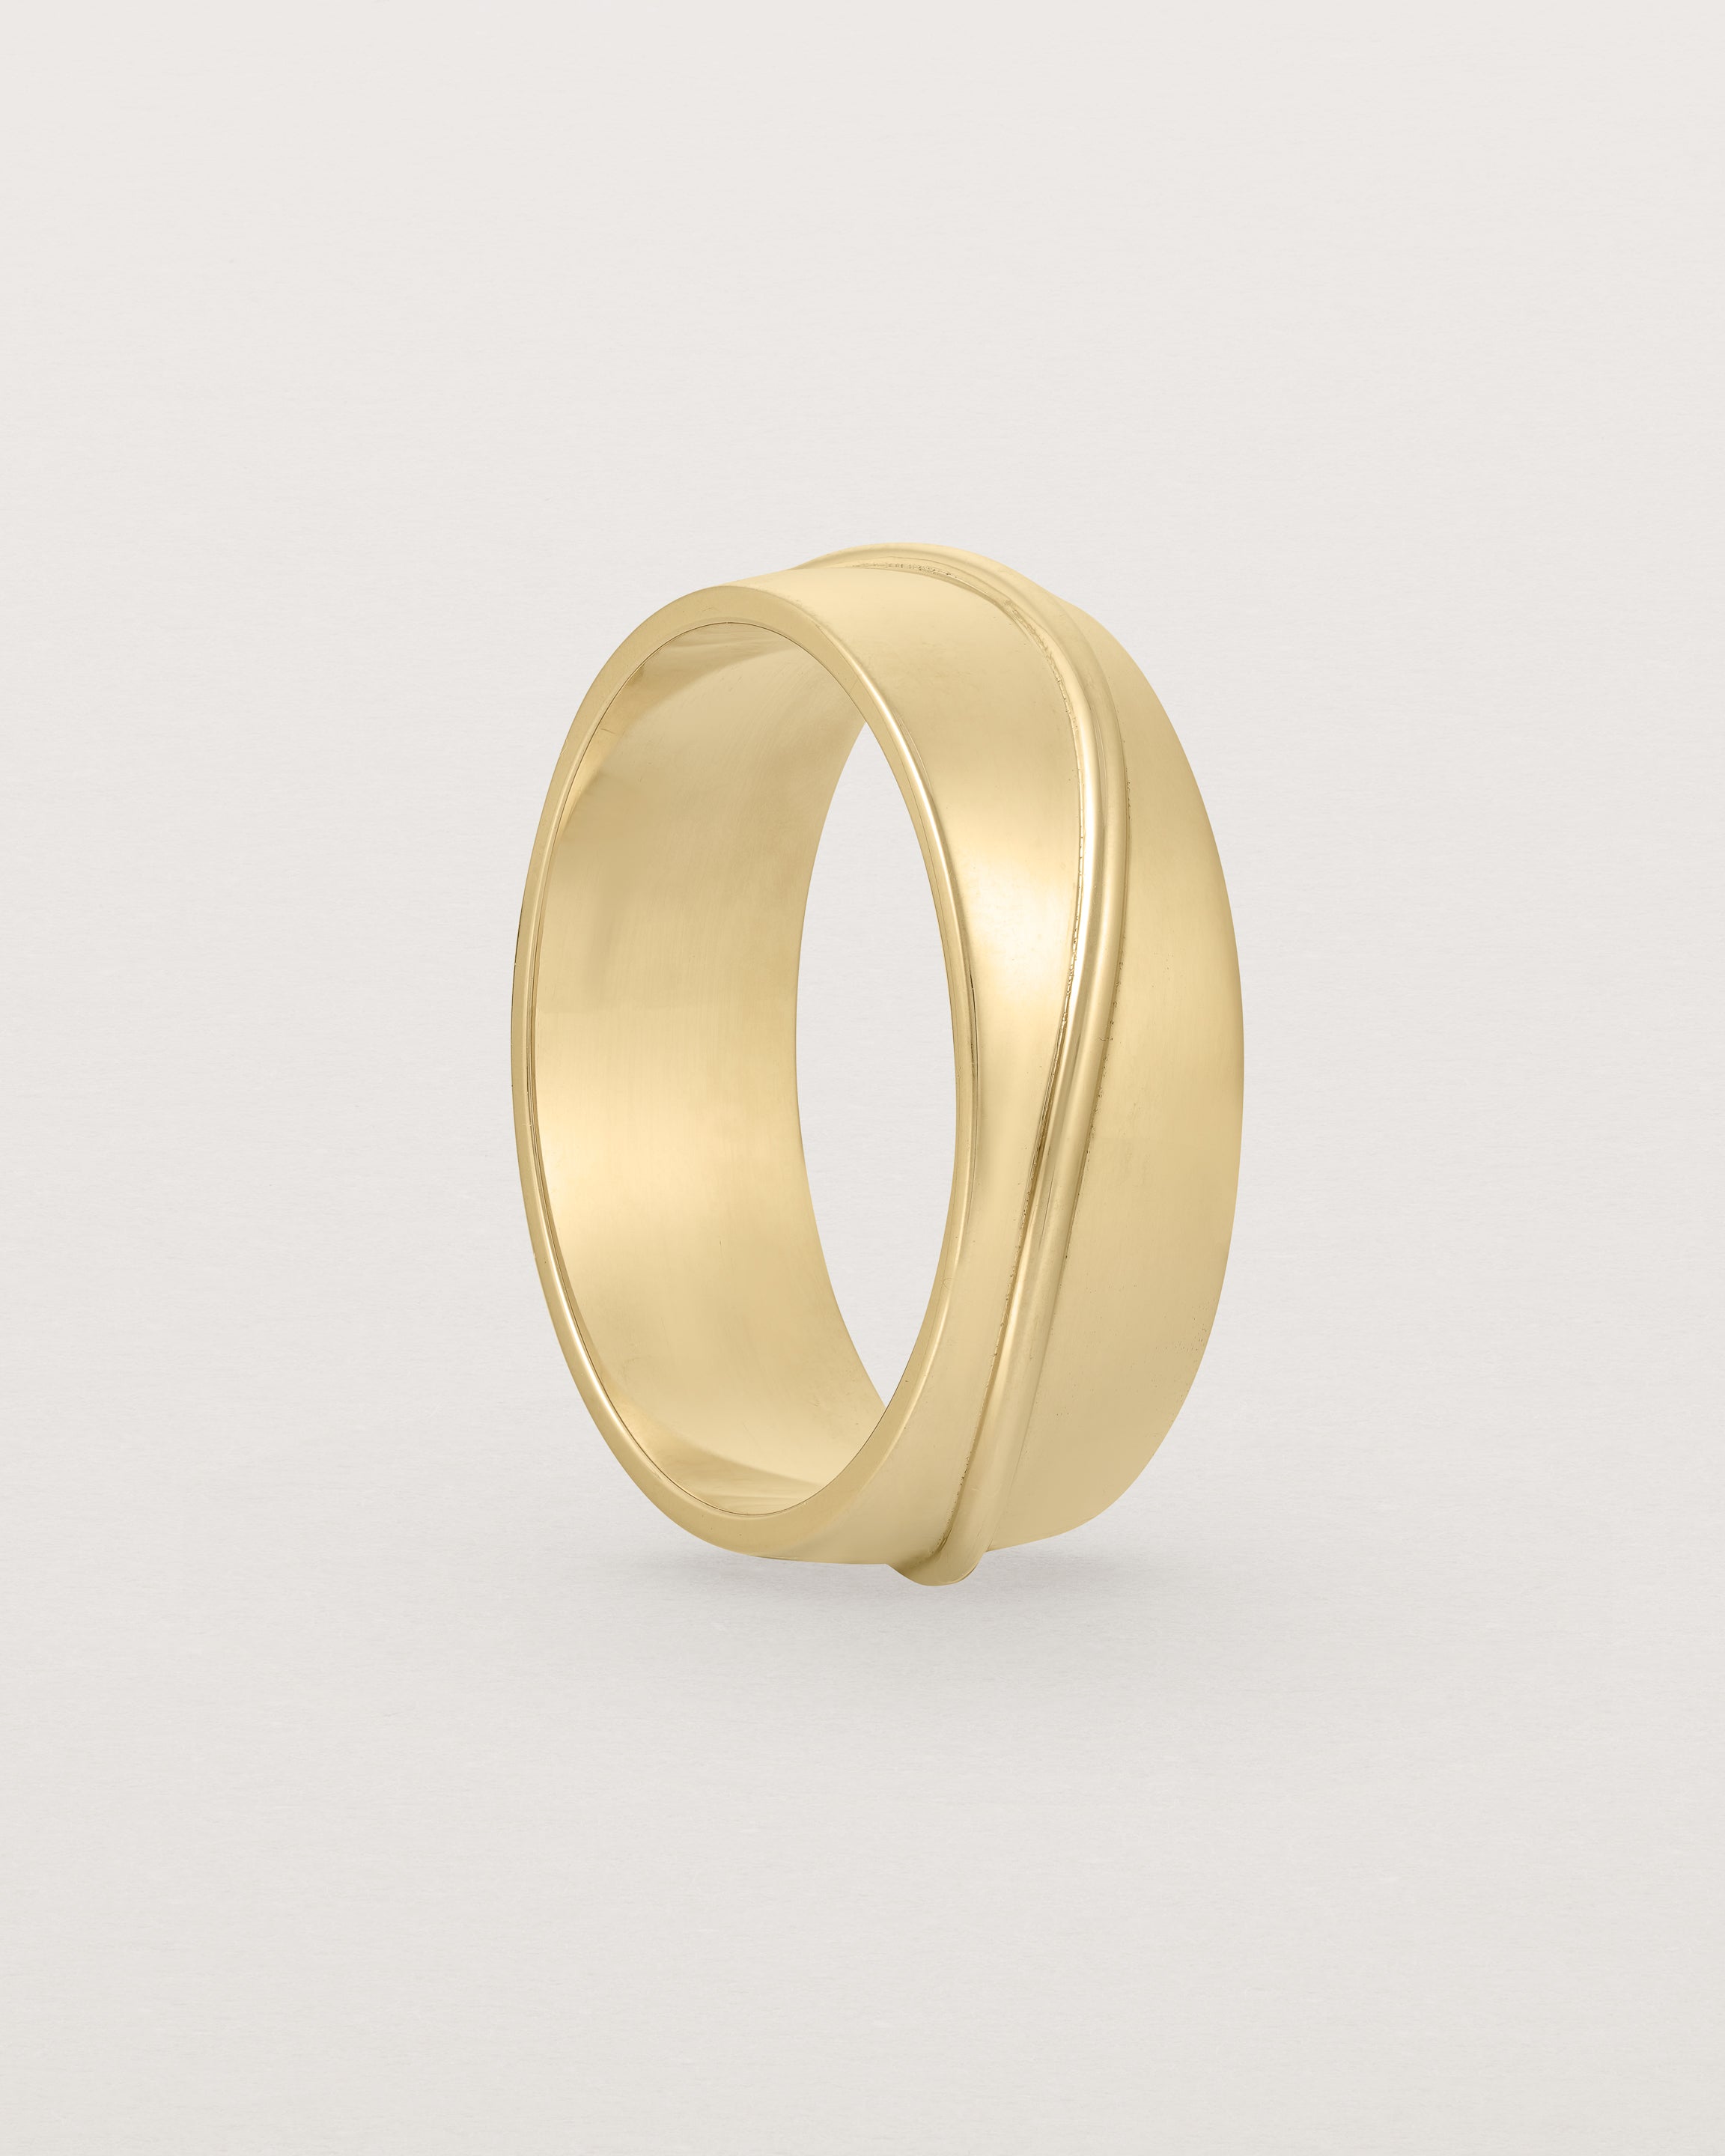 Standing view of the Surge Wedding Ring | 7mm | Yellow Gold.